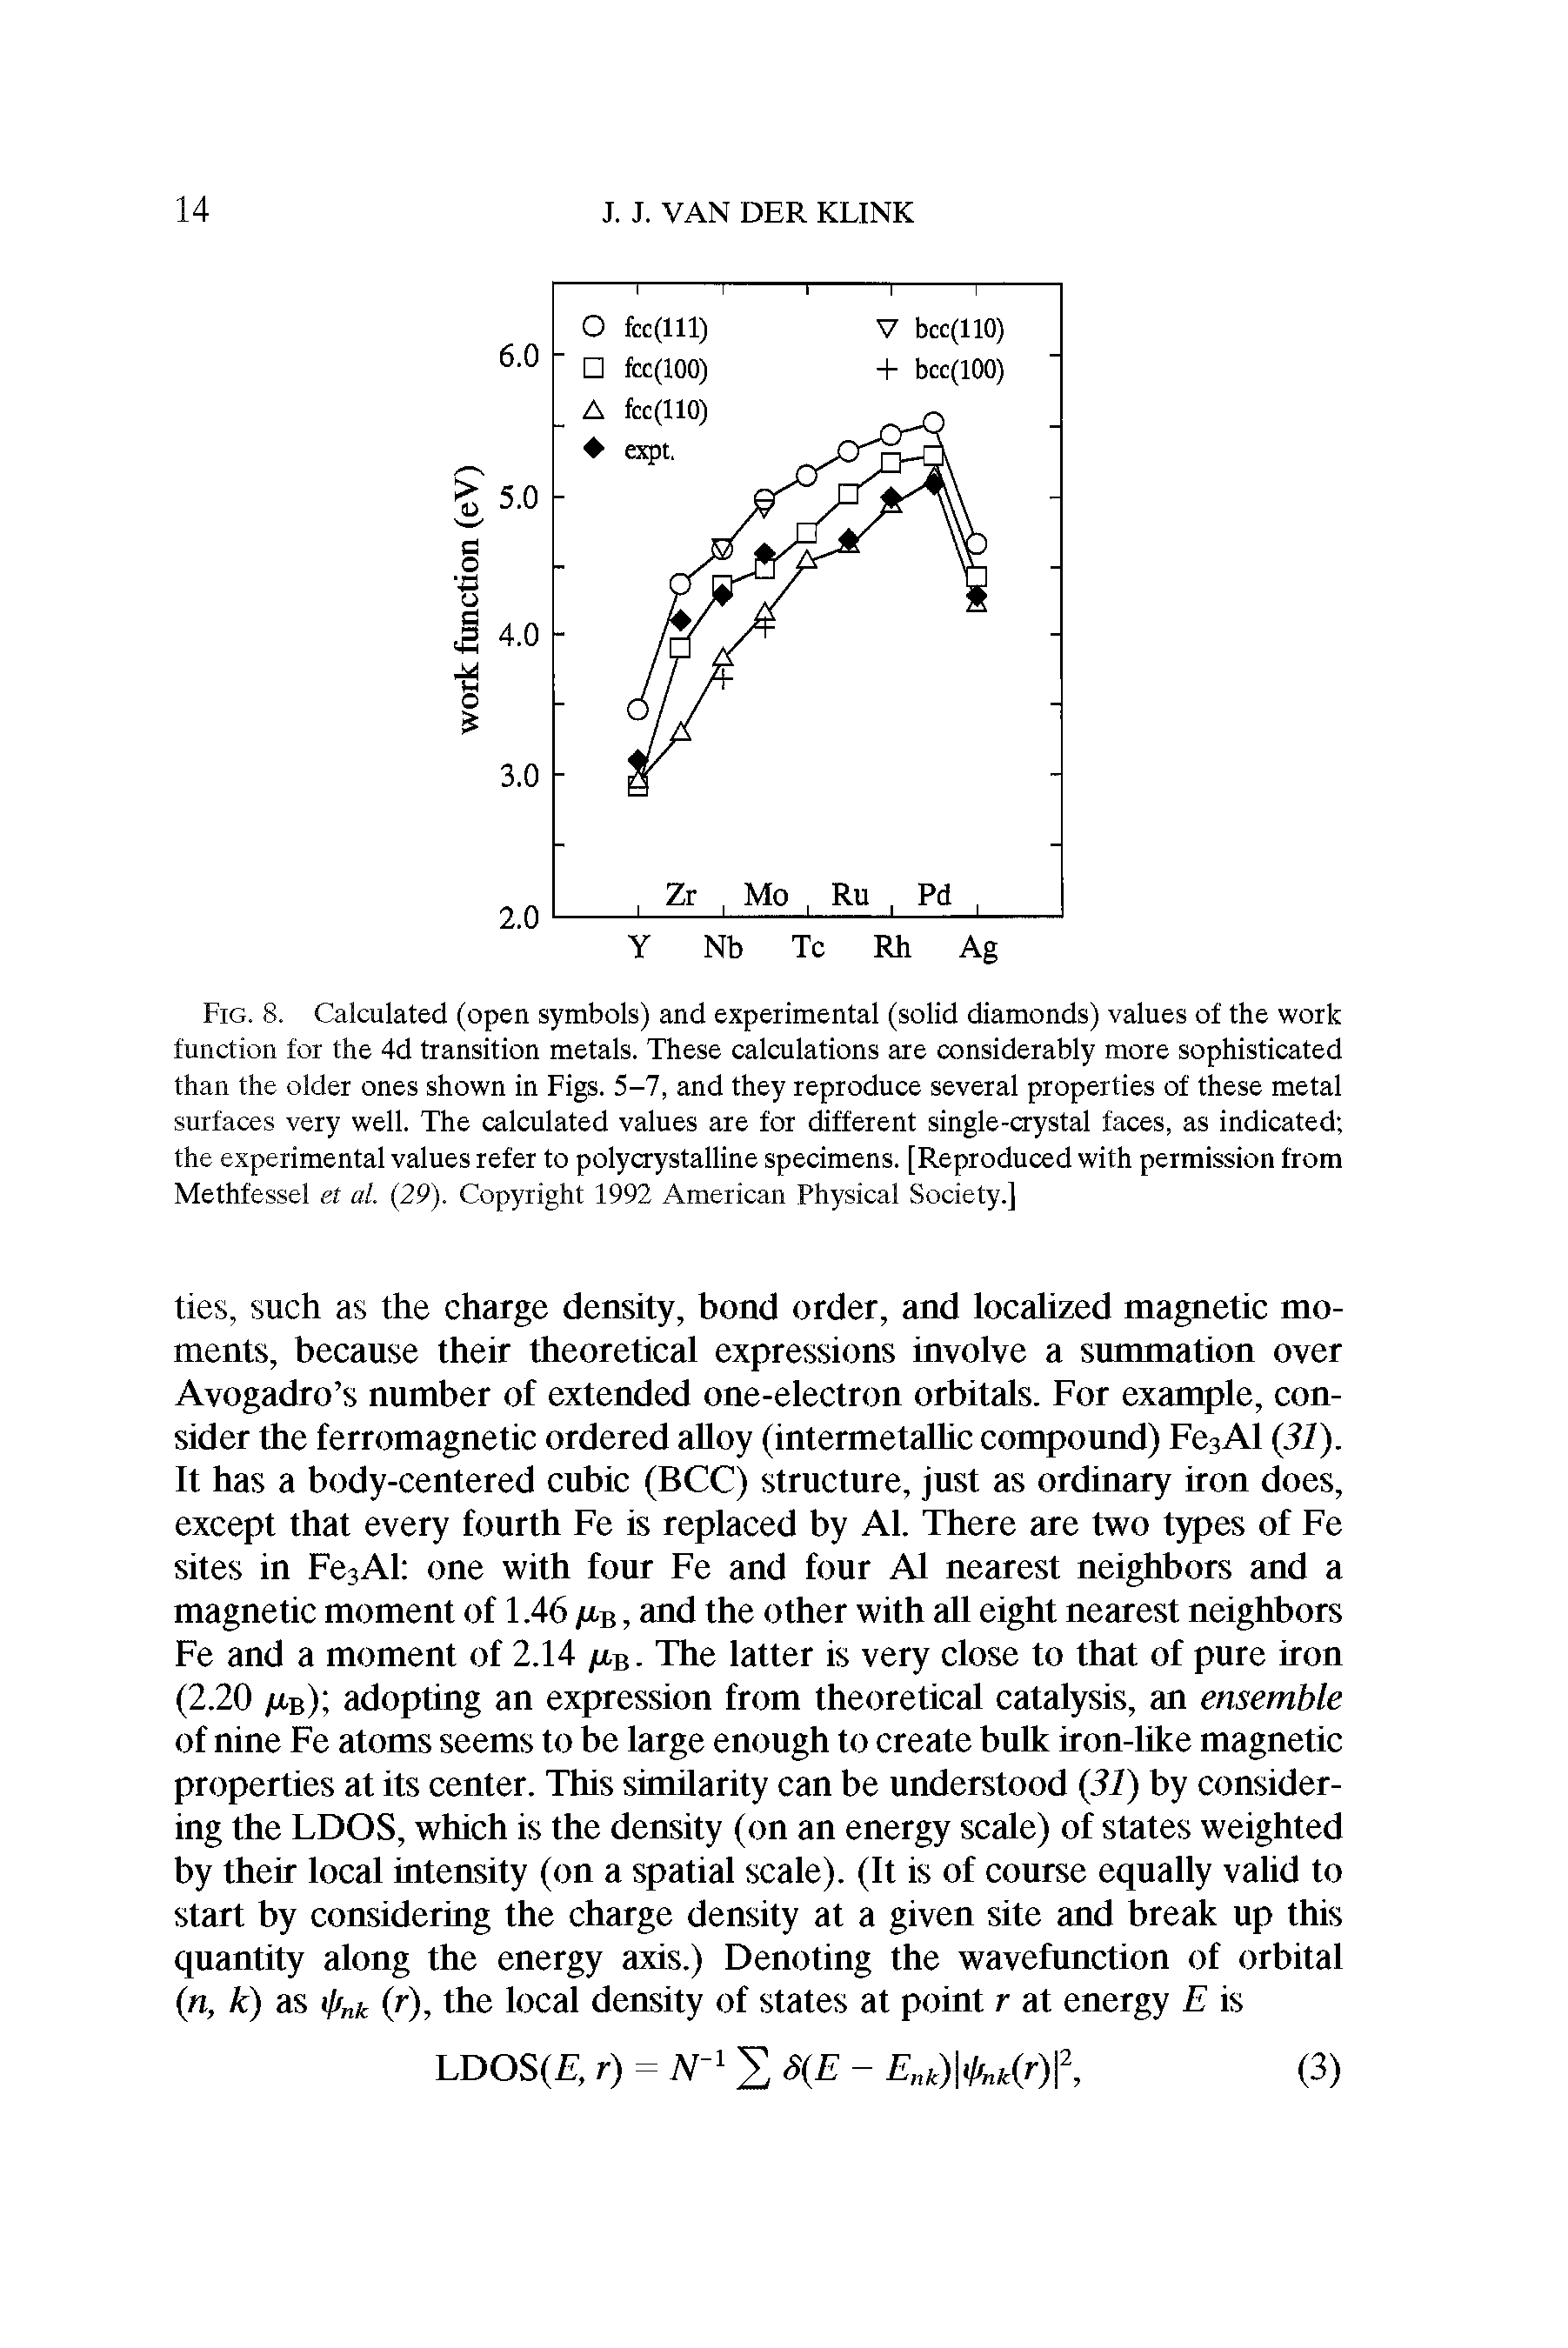 Fig. 8. Calculated (open symbols) and experimental (solid diamonds) values of the work function for the 4d transition metals. These calculations are considerably more sophisticated than the older ones shown in Figs. 5-7, and they reproduce several properties of these metal surfaces very well. The calculated values are for different single-crystal faces, as indicated the experimental values refer to polycrystalline specimens. [Reproduced with permission from Methfessel et al. (29). Copyright 1992 American Physical Society.]...